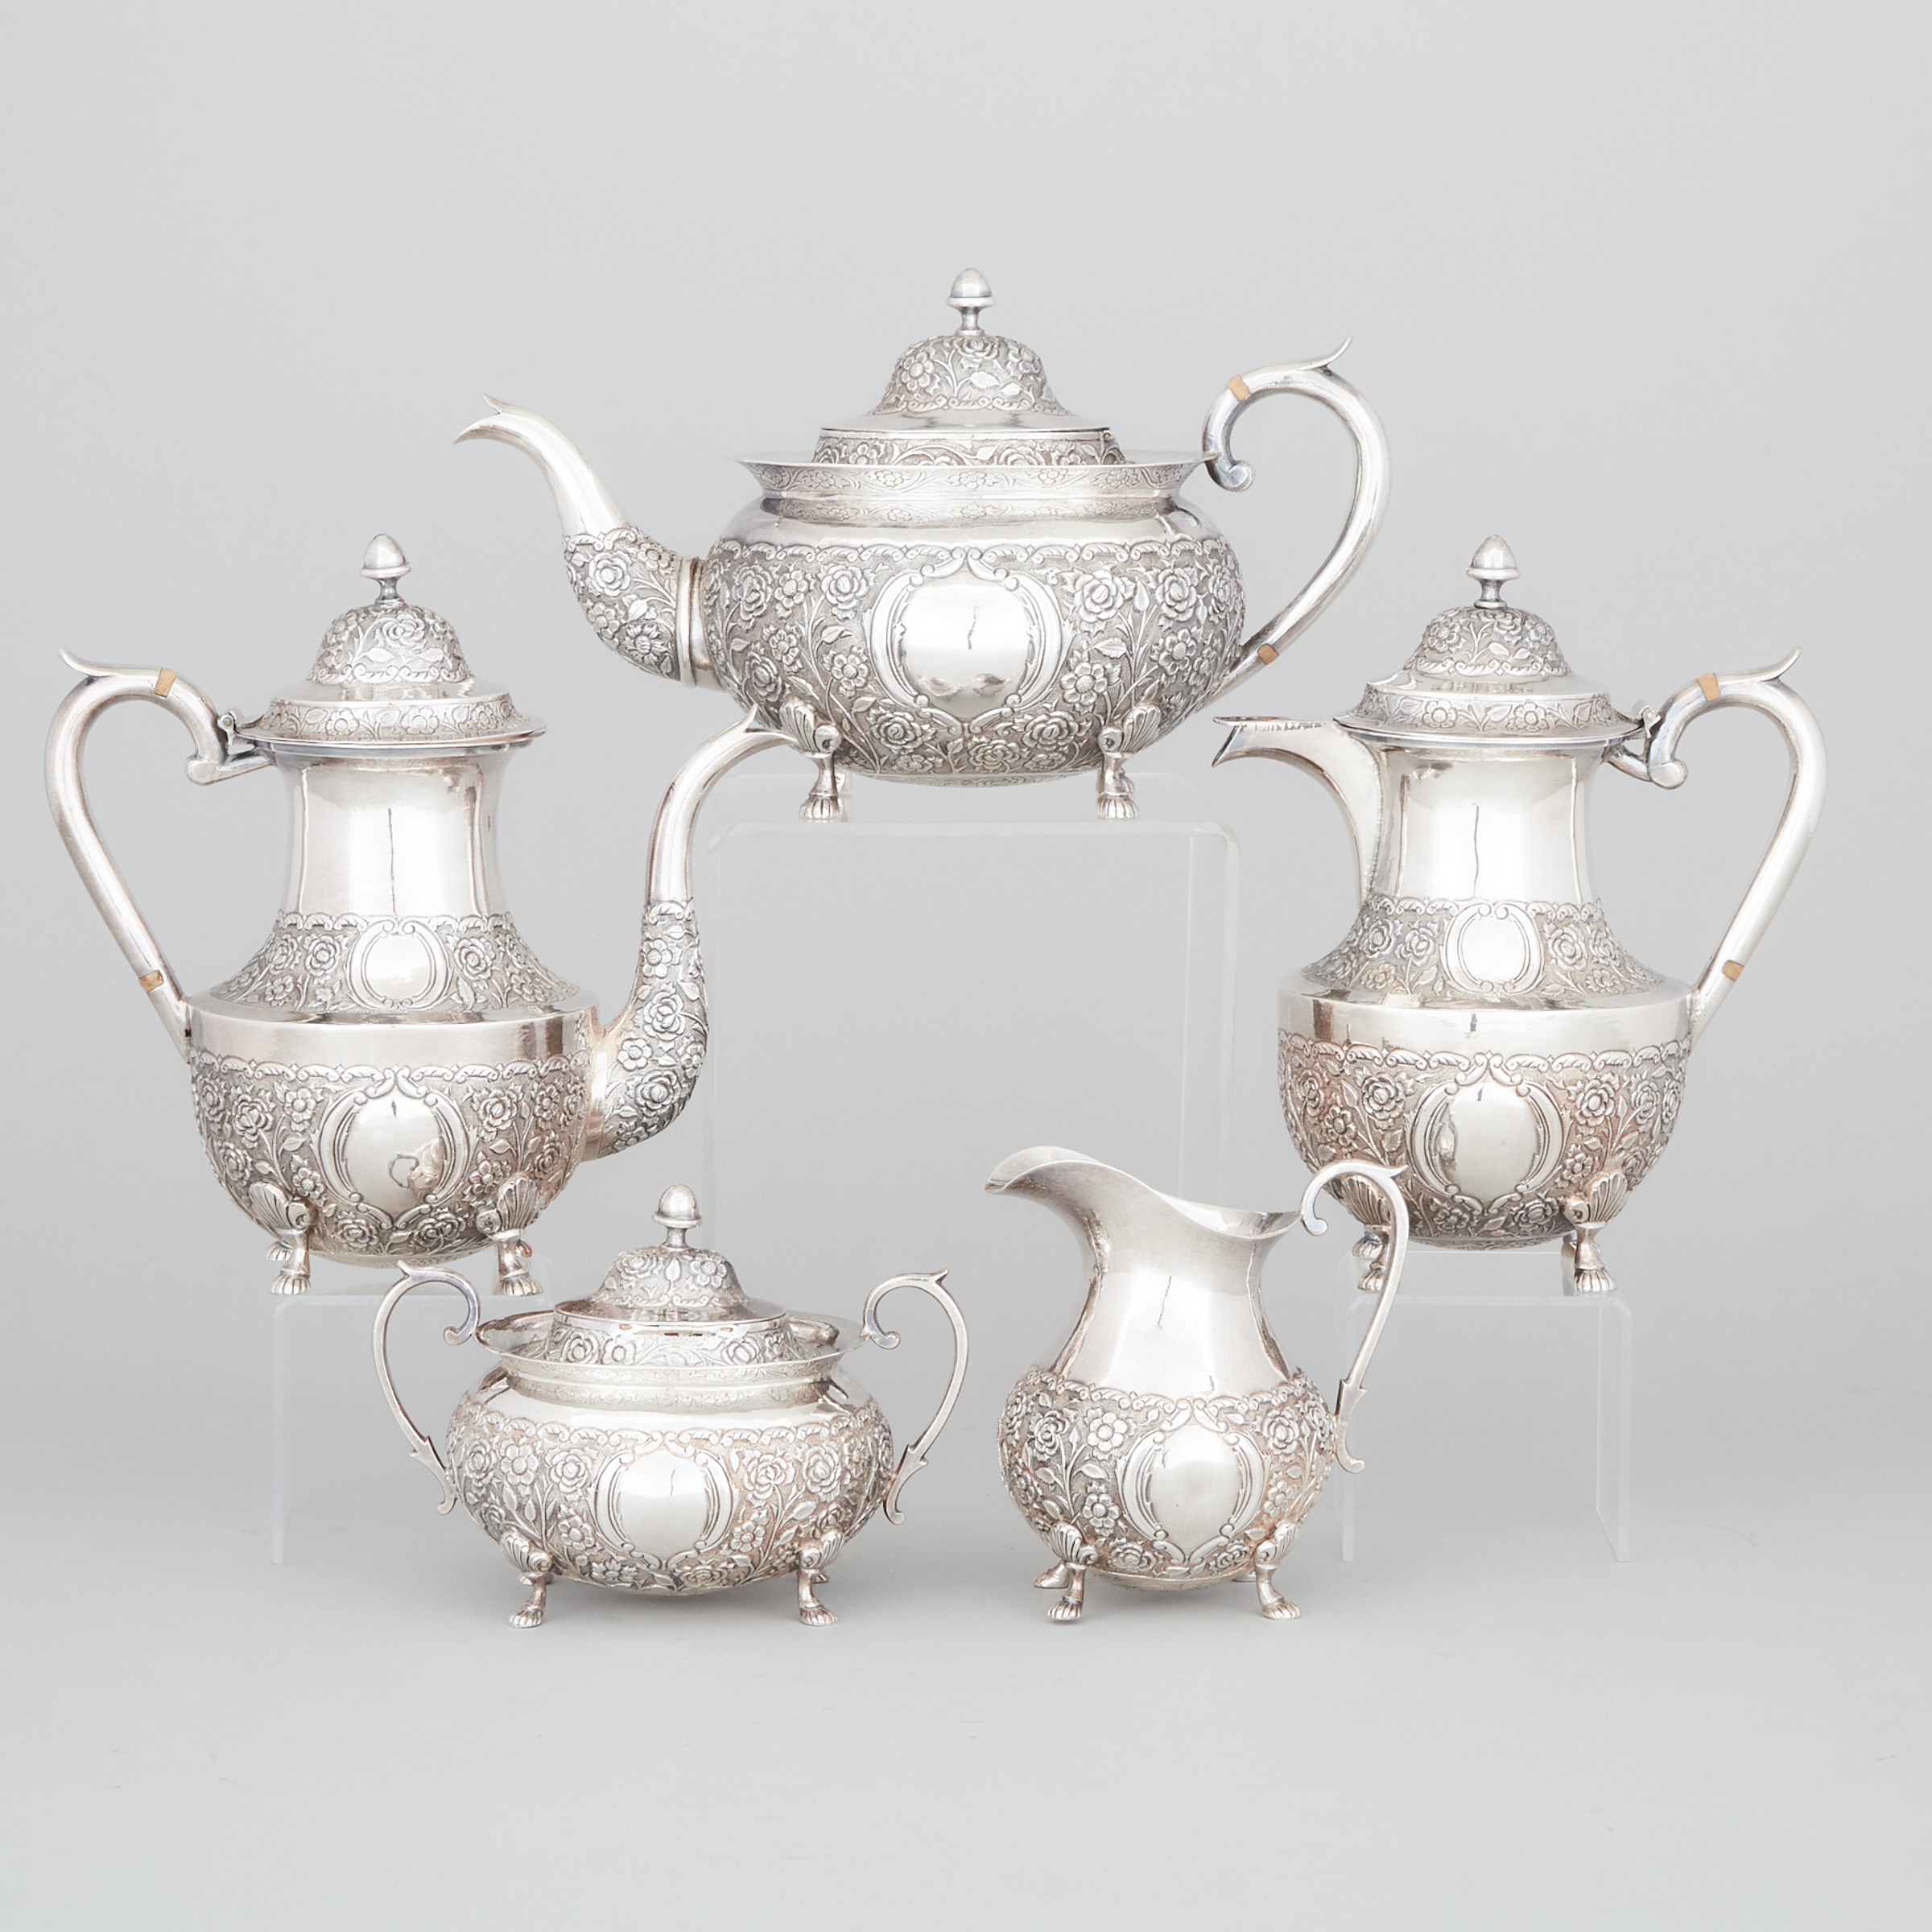 Indian Silver Tea and Coffee Service, c.1900